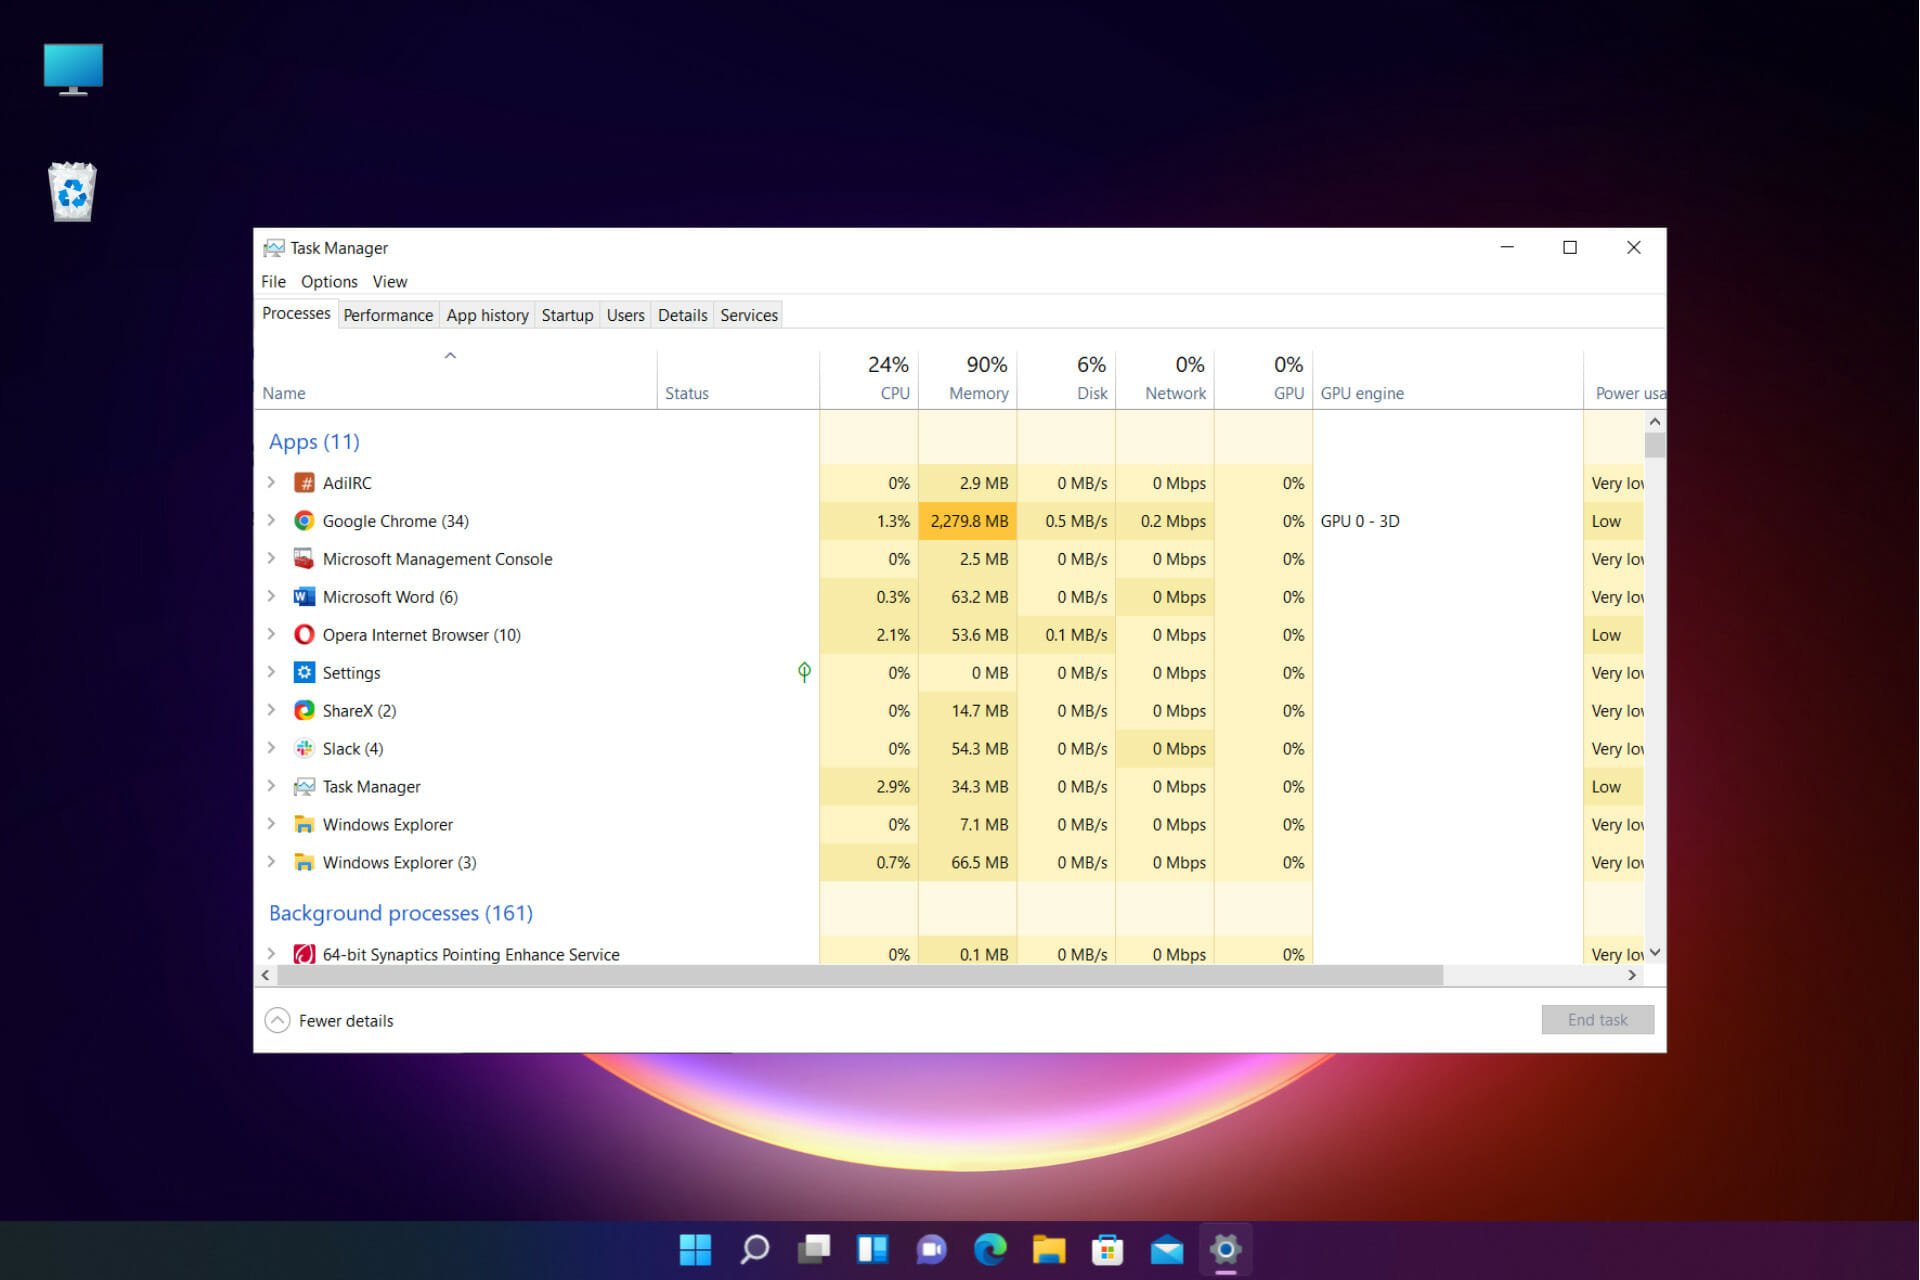 Fix: Too Many Background Processes on Your Windows PC